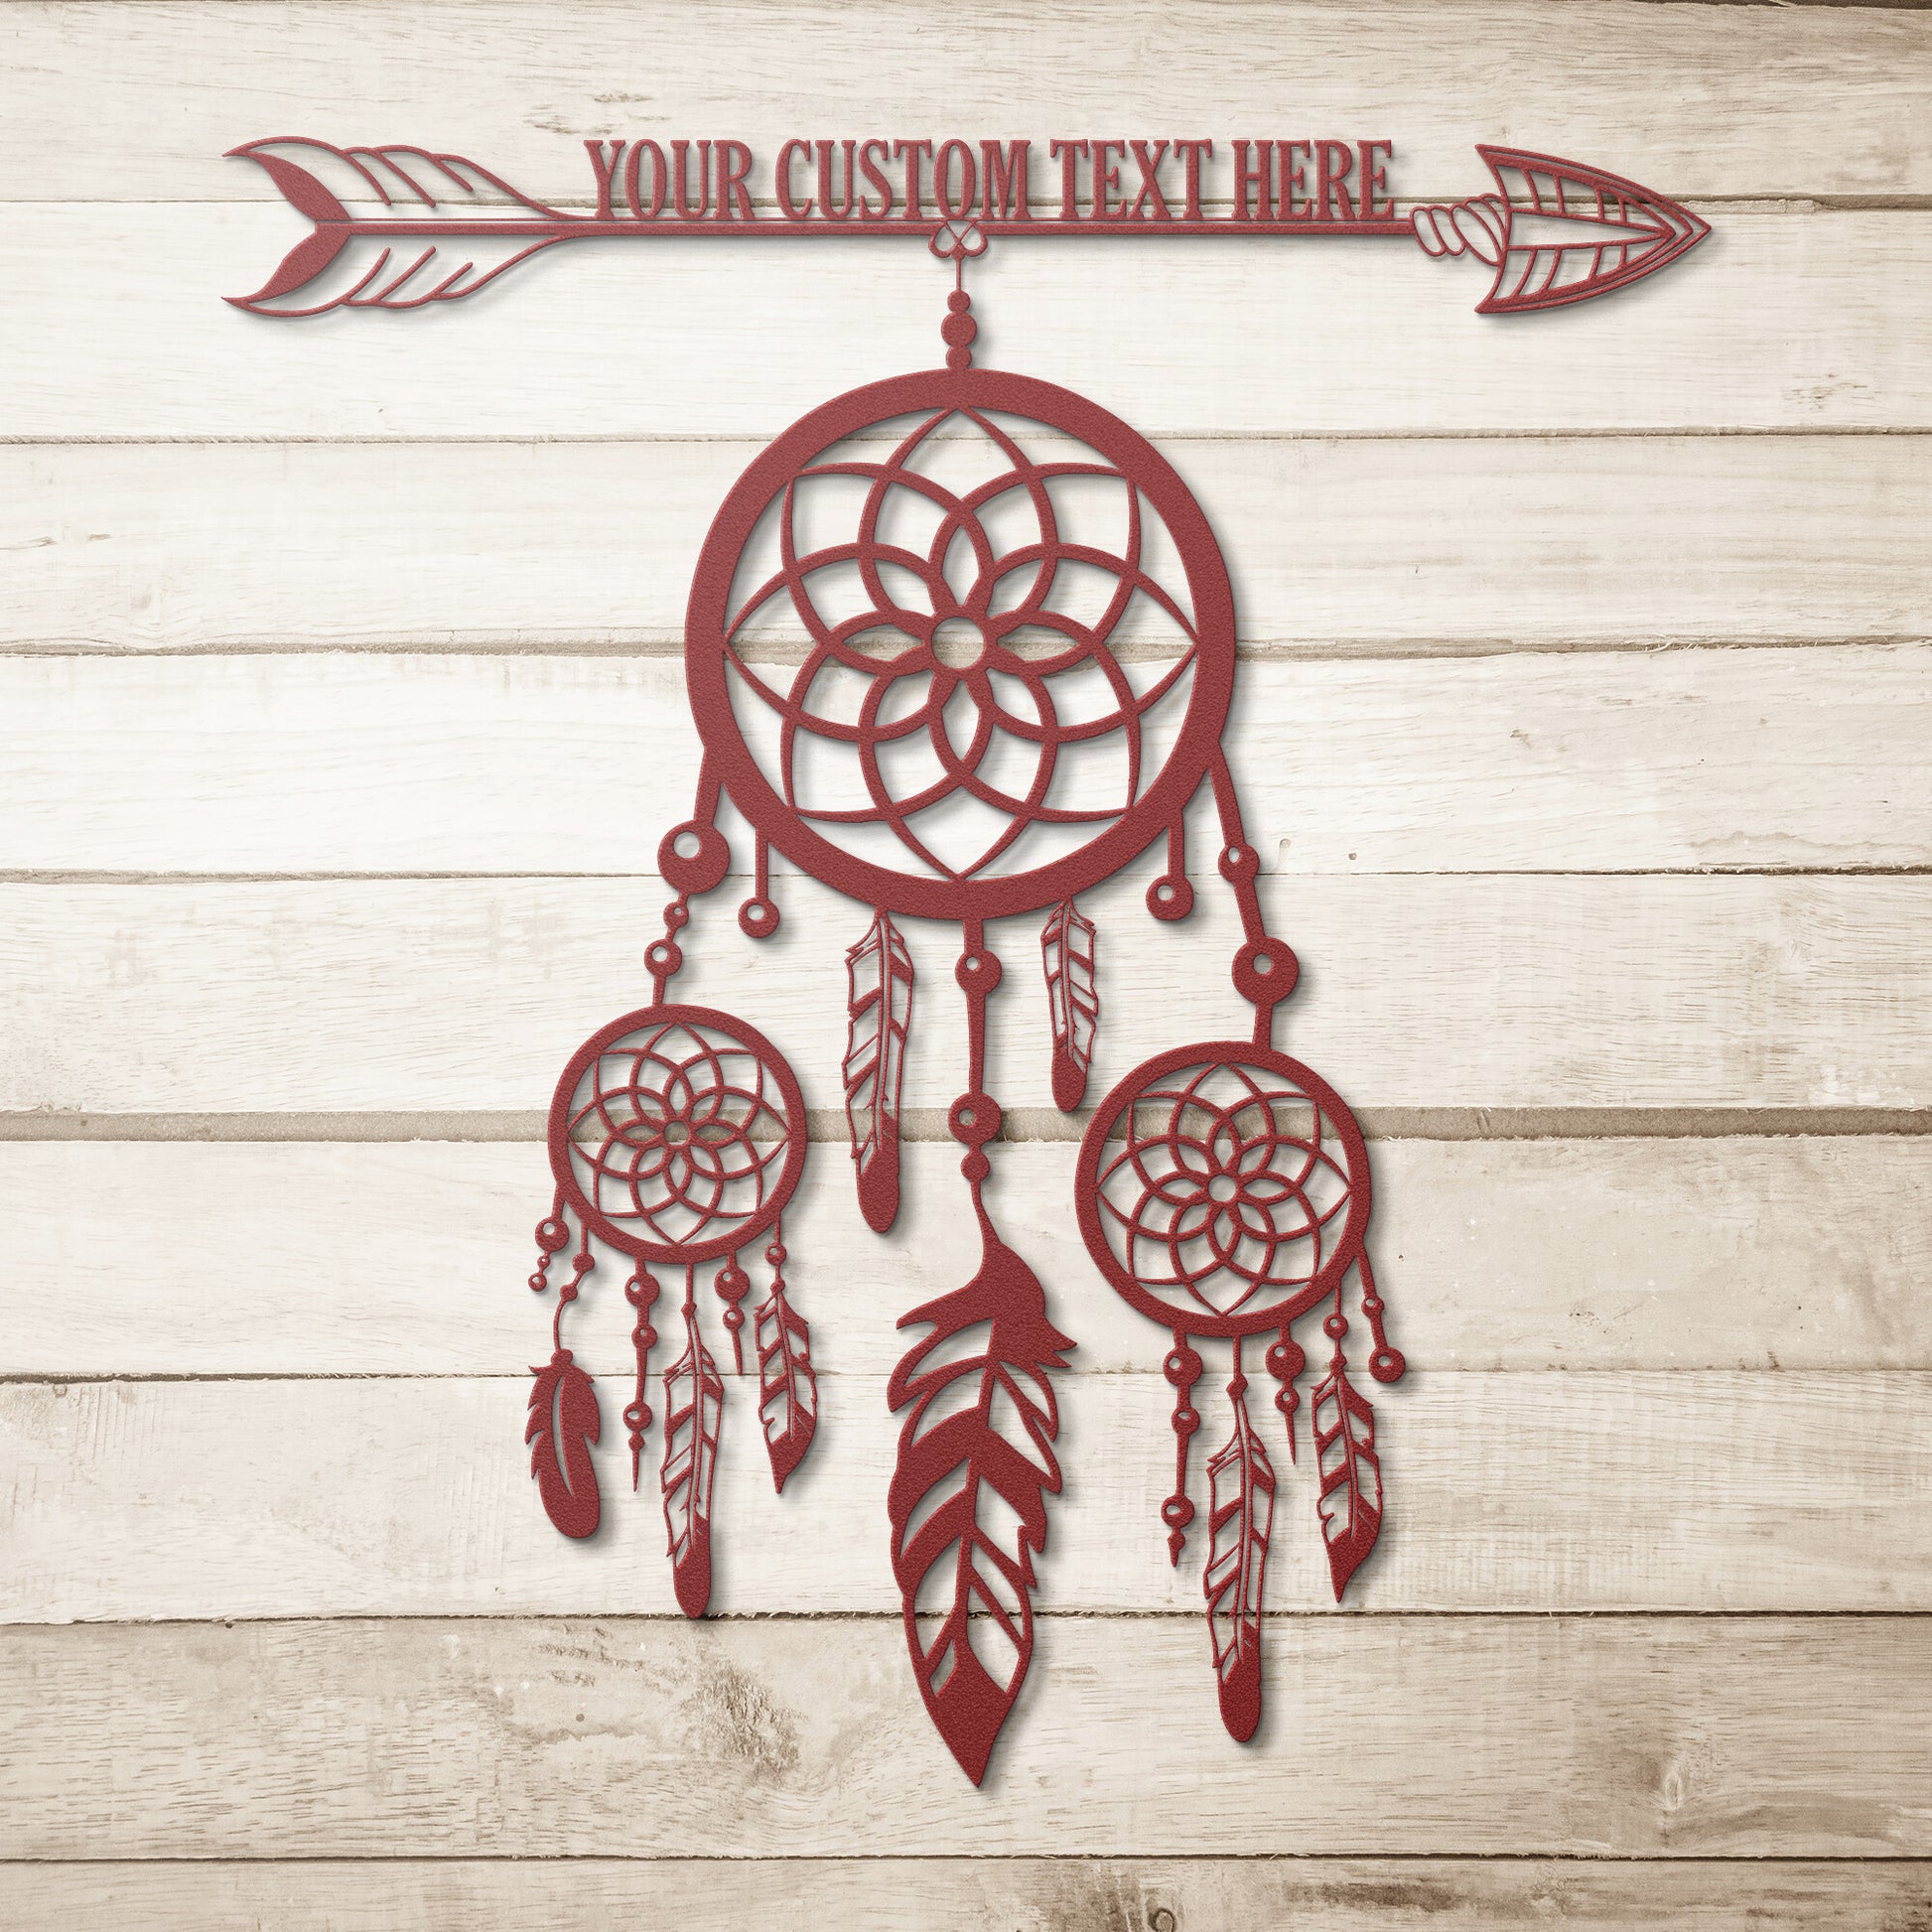 Personalized dreamcatcher with feathers and custom text black metal sign